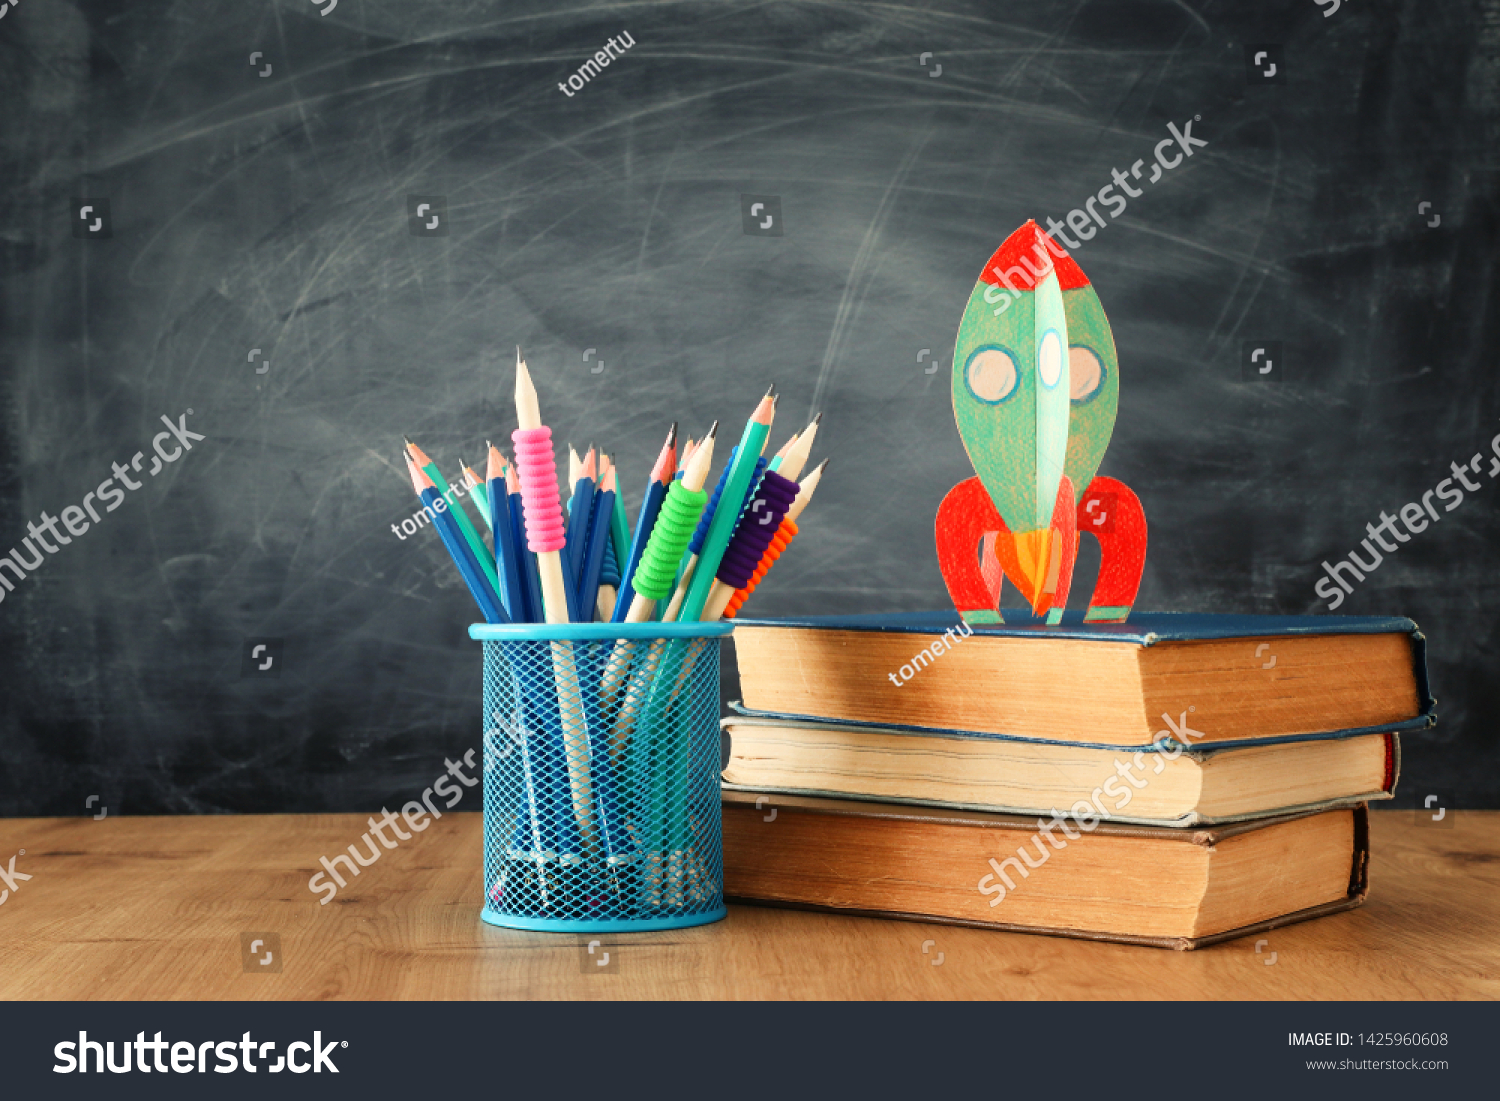 education and back to school concept. cardboard rocket and pencils over books in front of classroom blackboard #1425960608